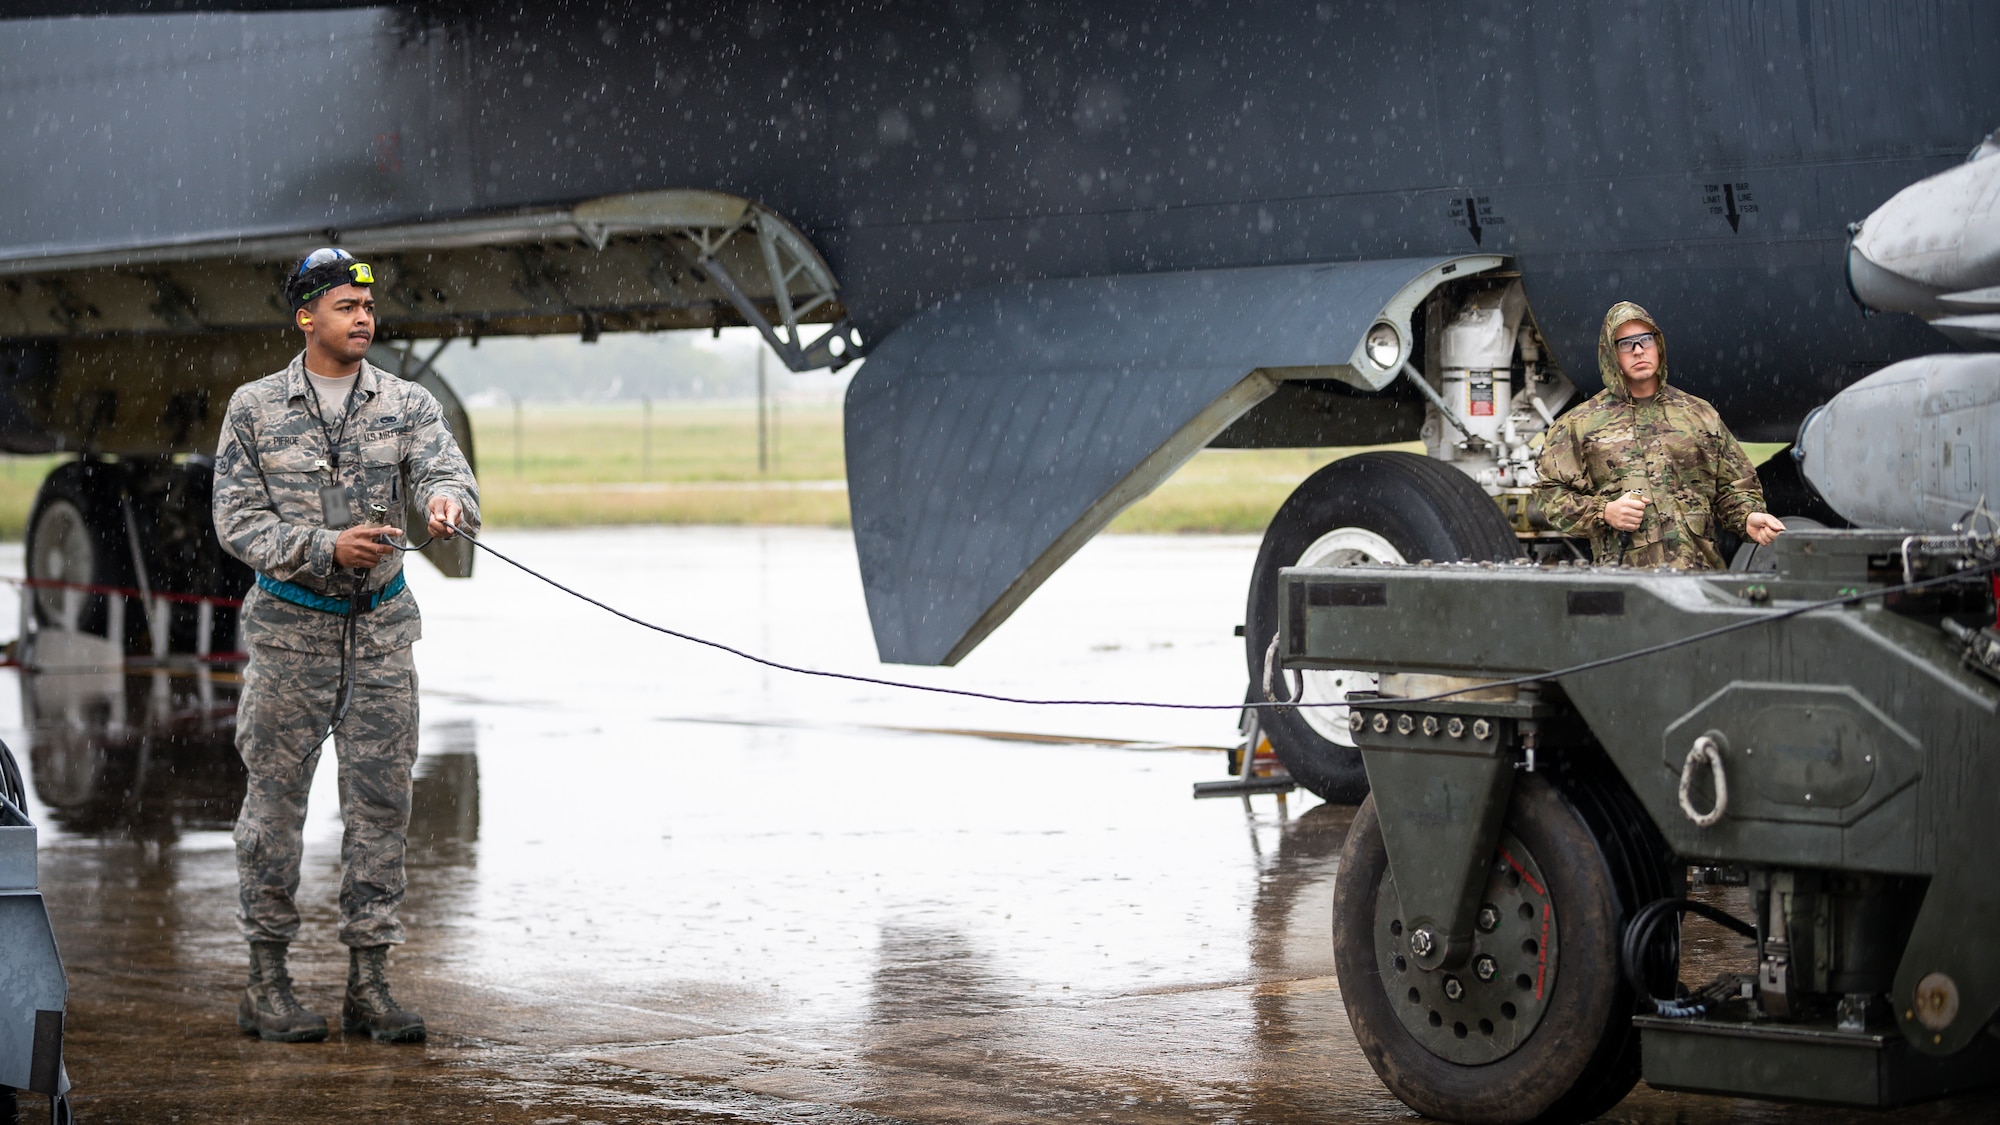 Senior Airman Timothy Pierce and Senior Airman Paul Donahue, 20th Aircraft Maintenance Unit weapons load crew members, load munitions on a B-52H Stratofortress during a readiness exercise at Barksdale Air Force Base, La., Sept. 21, 2020.